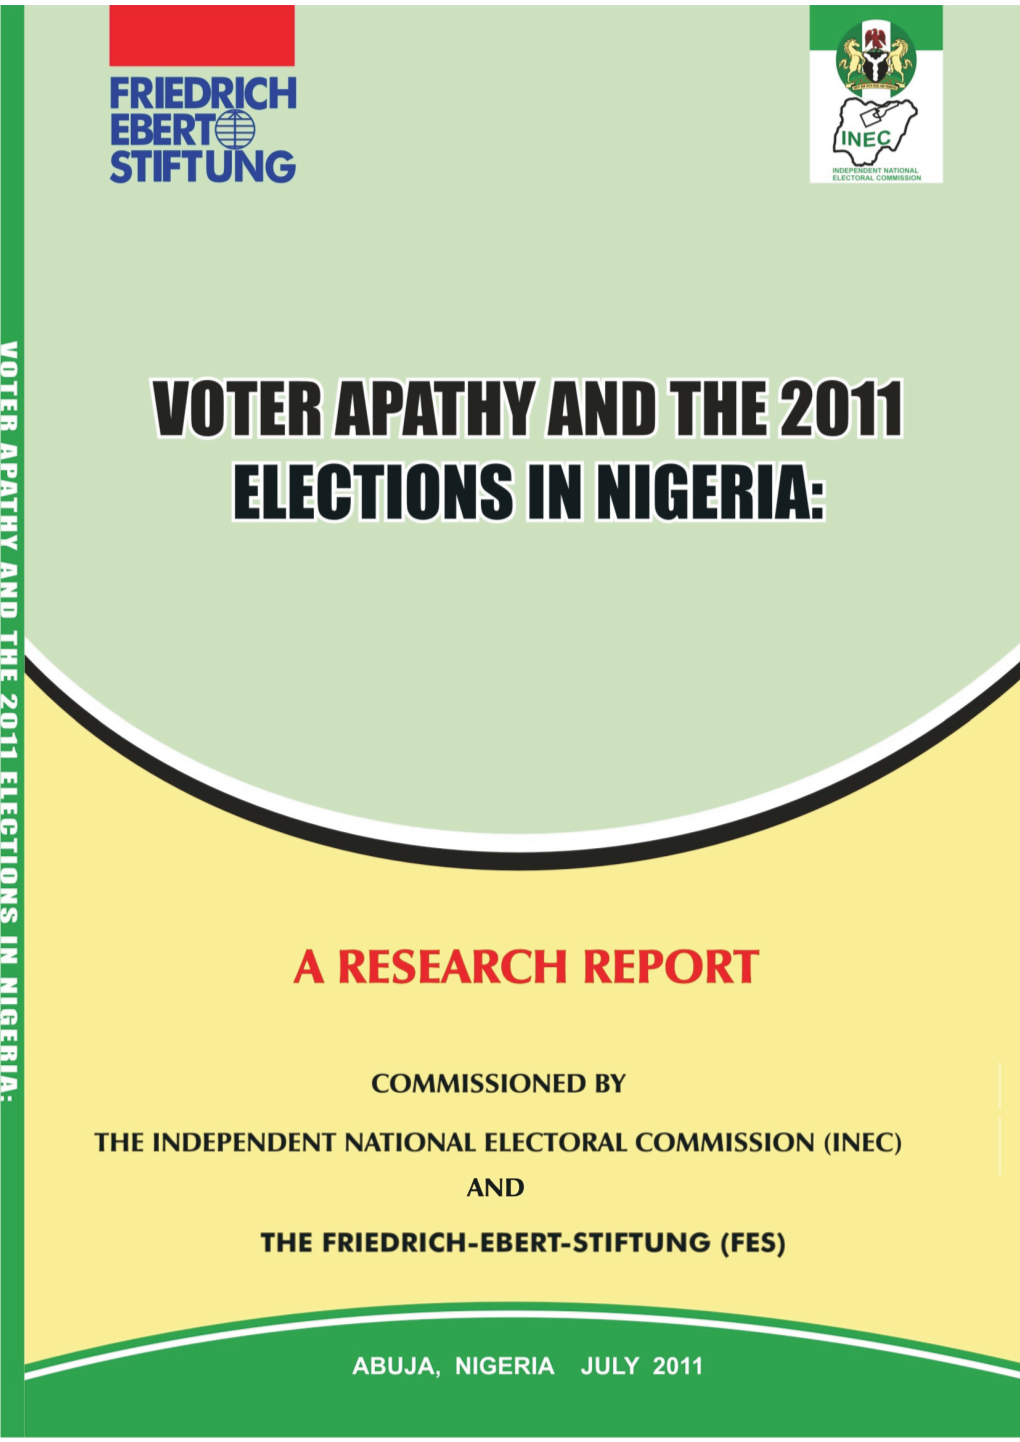 Voter Apathy and the 2011 Elections in Nigeria